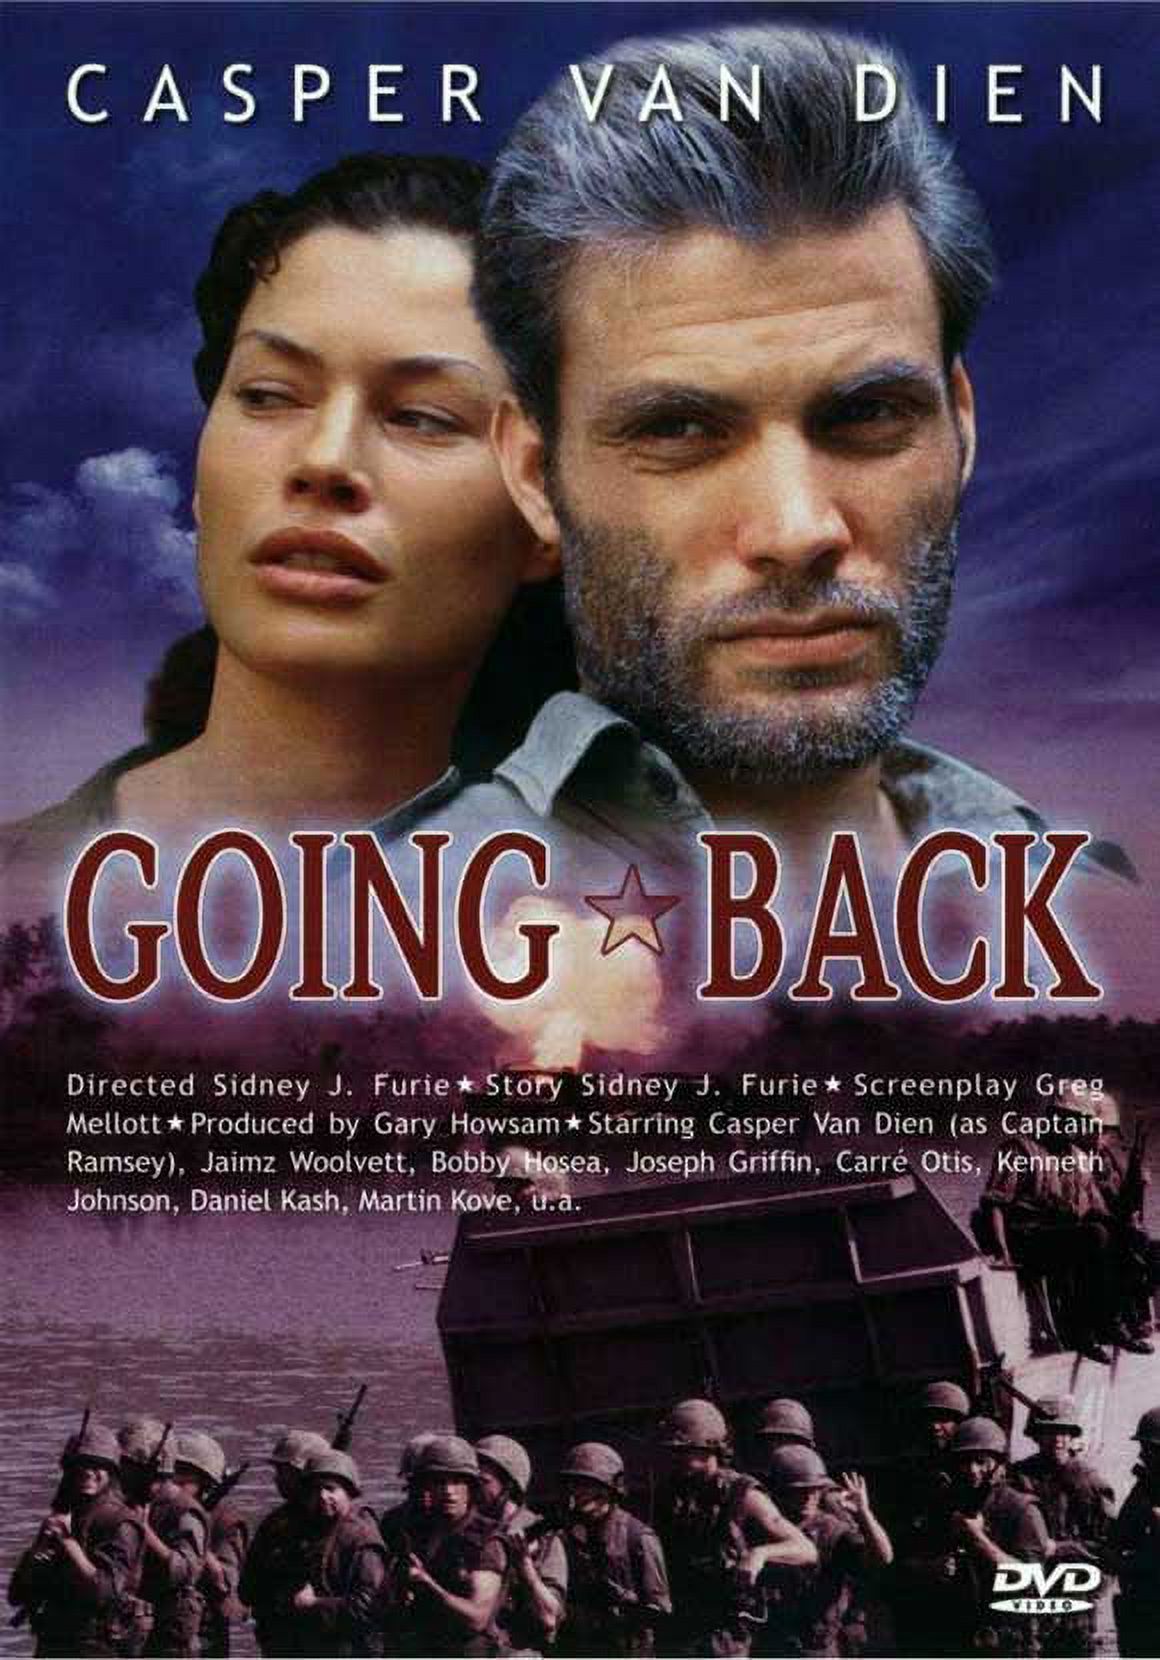 Going Back POSTER (27x40) (2001) - image 1 of 2